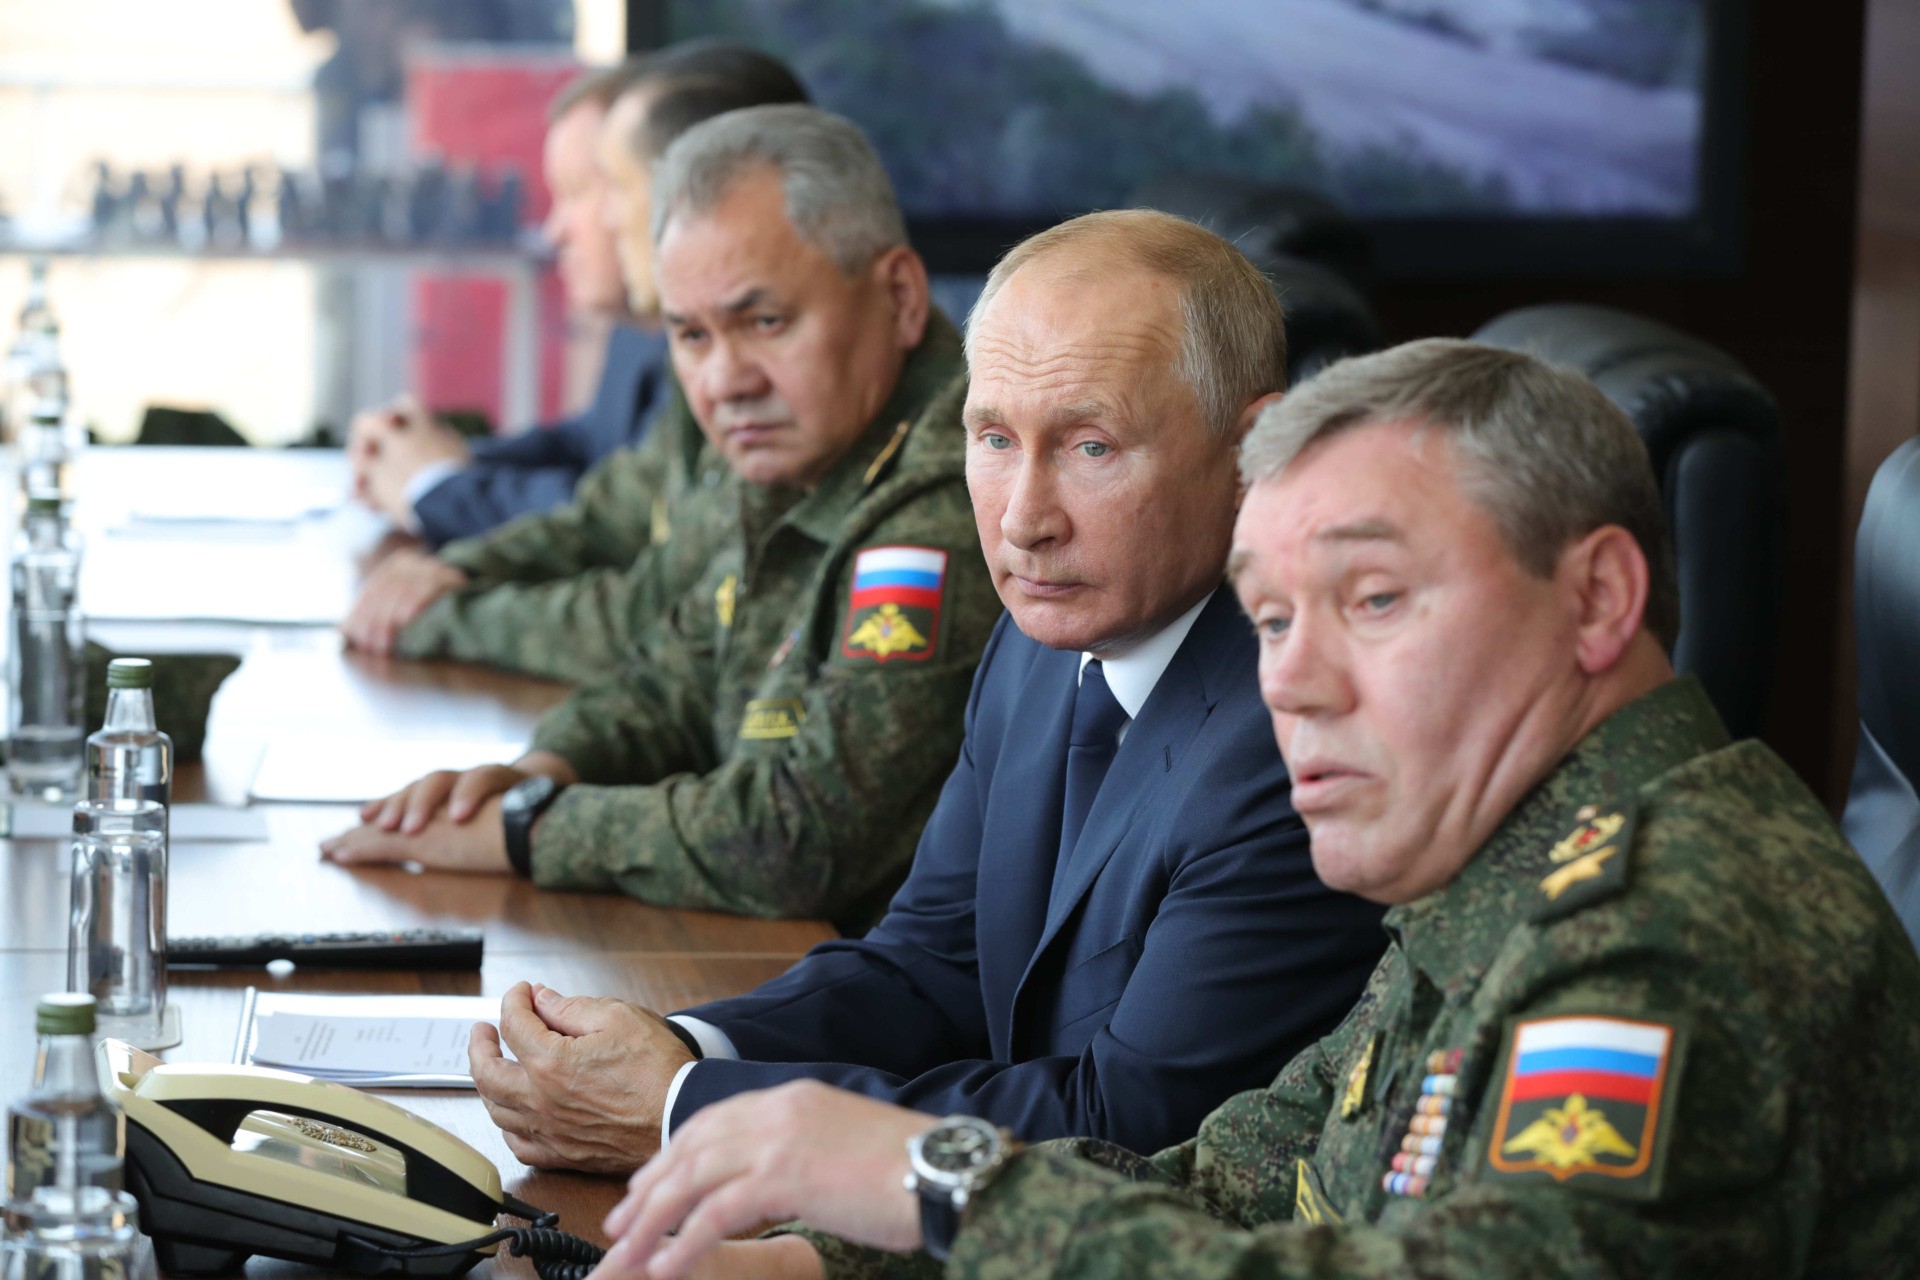 Russian President Vladimir Putin, accompanied by Defence Minister Sergei Shoigu and Valery Gerasimov, the chief of the Russian General Staff, oversees the "Caucasus-2020" military exercises at the Kapustin Yar range near the city of Astrakhan on September 25, 2020. (Photo by Mikhail KLIMENTYEV / SPUTNIK / AFP) (Photo by MIKHAIL KLIMENTYEV/SPUTNIK/AFP via Getty Images)